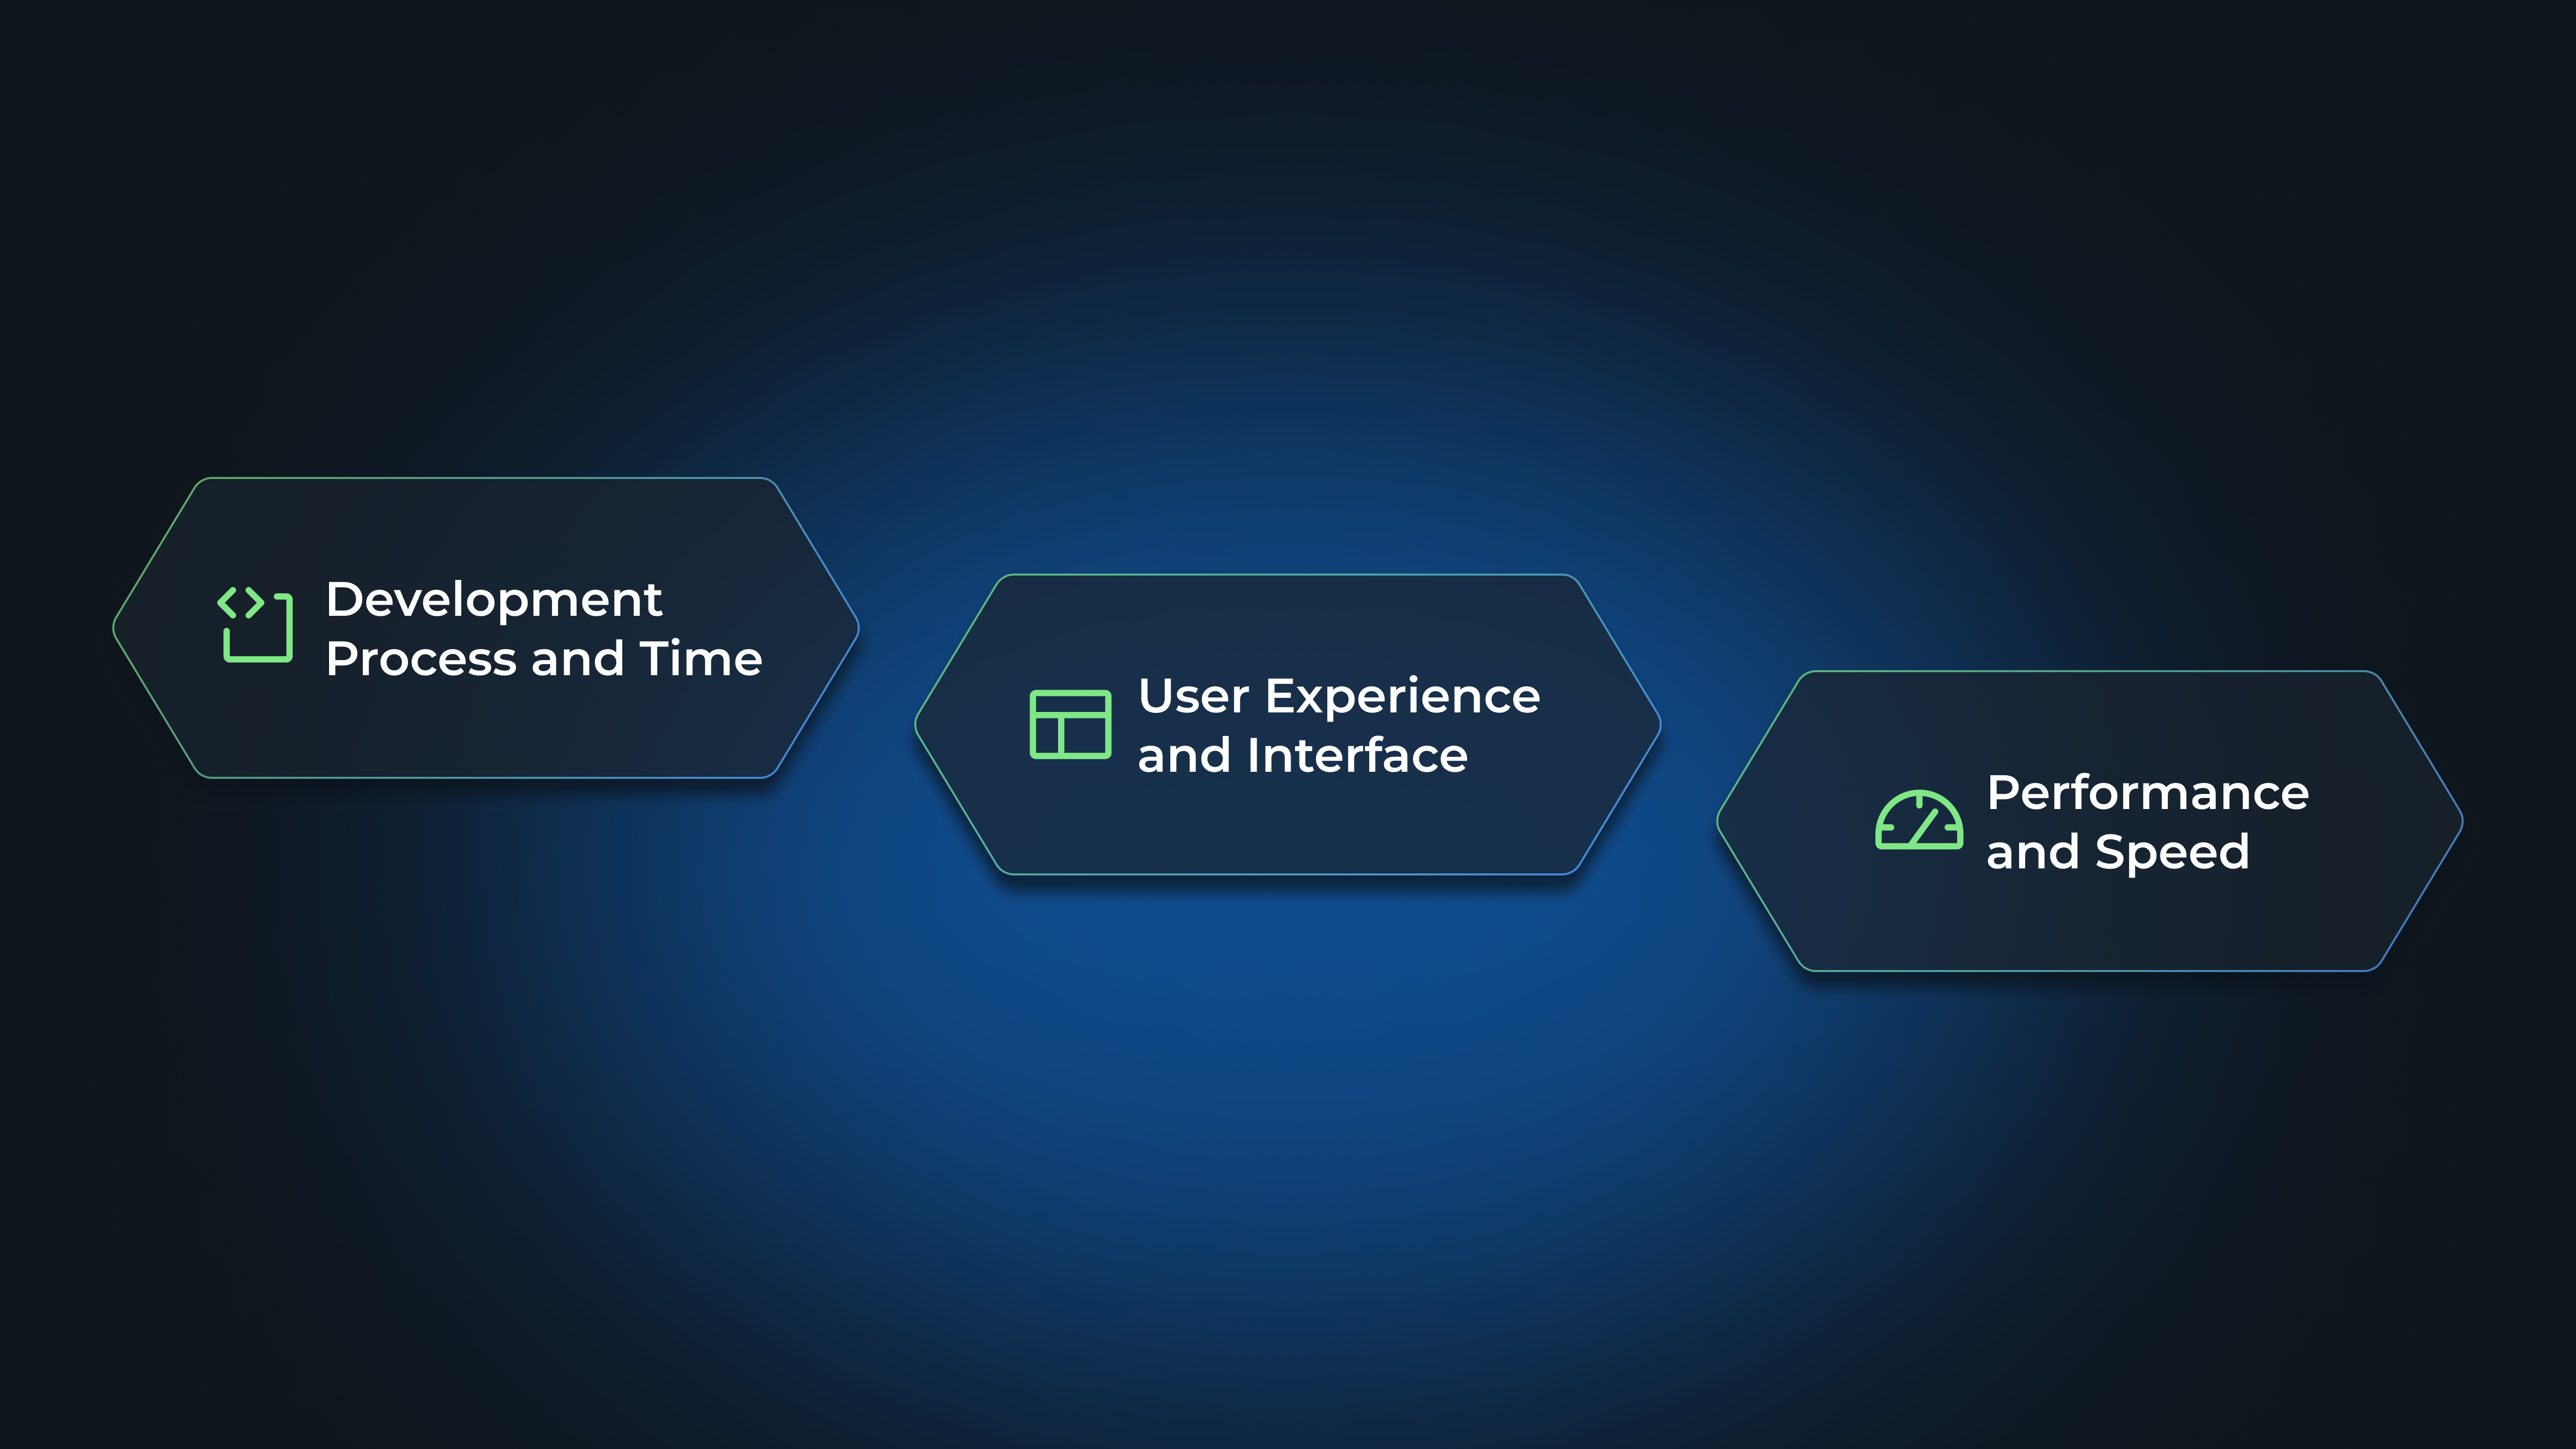 Development Process and Time, User Experience and Interface, Performance and Speed
